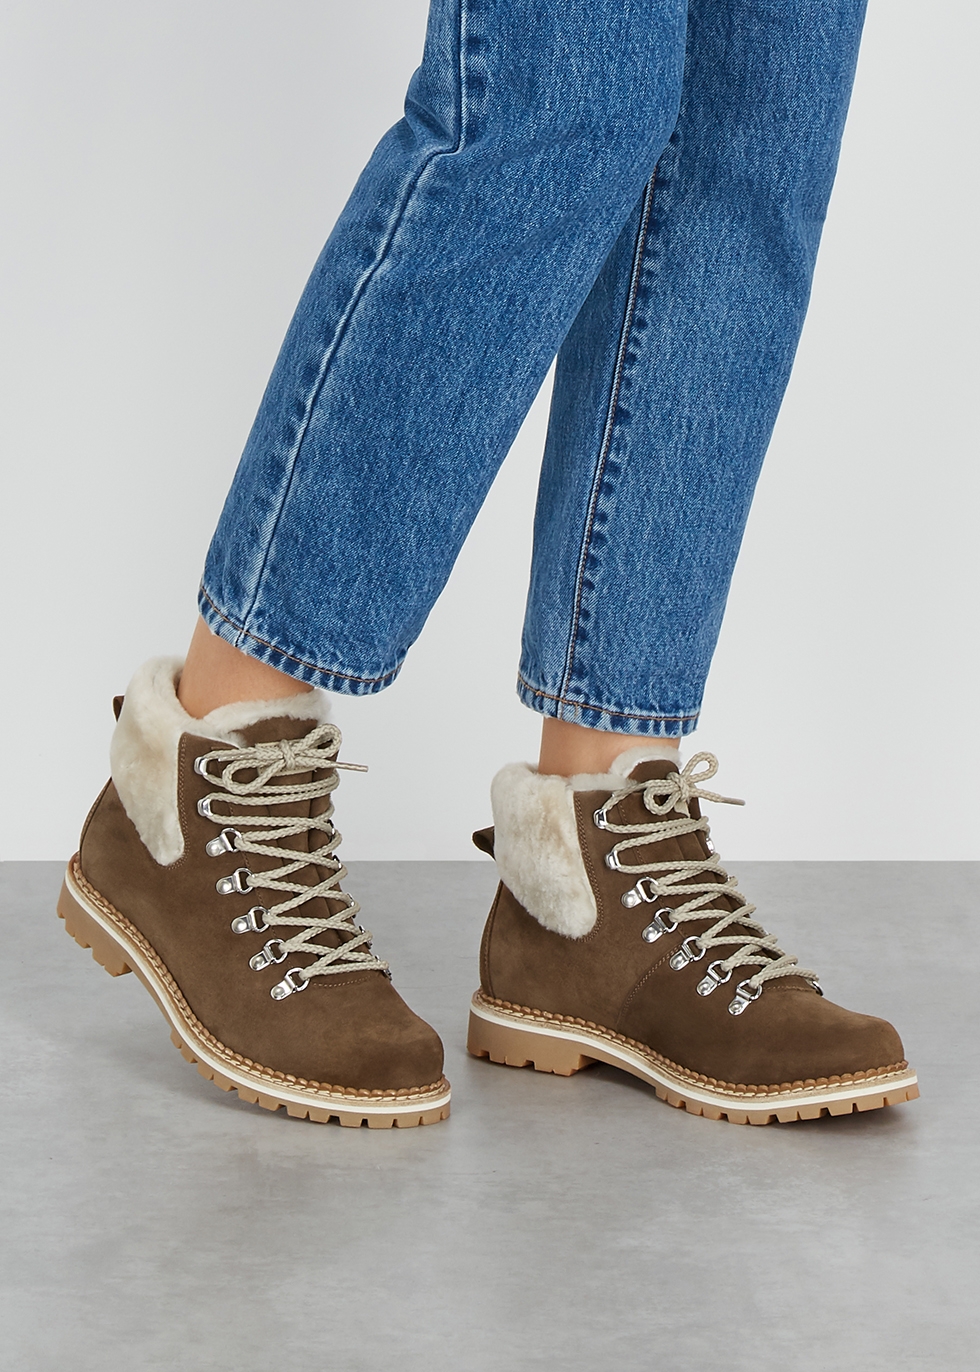 shearling lined ankle boots